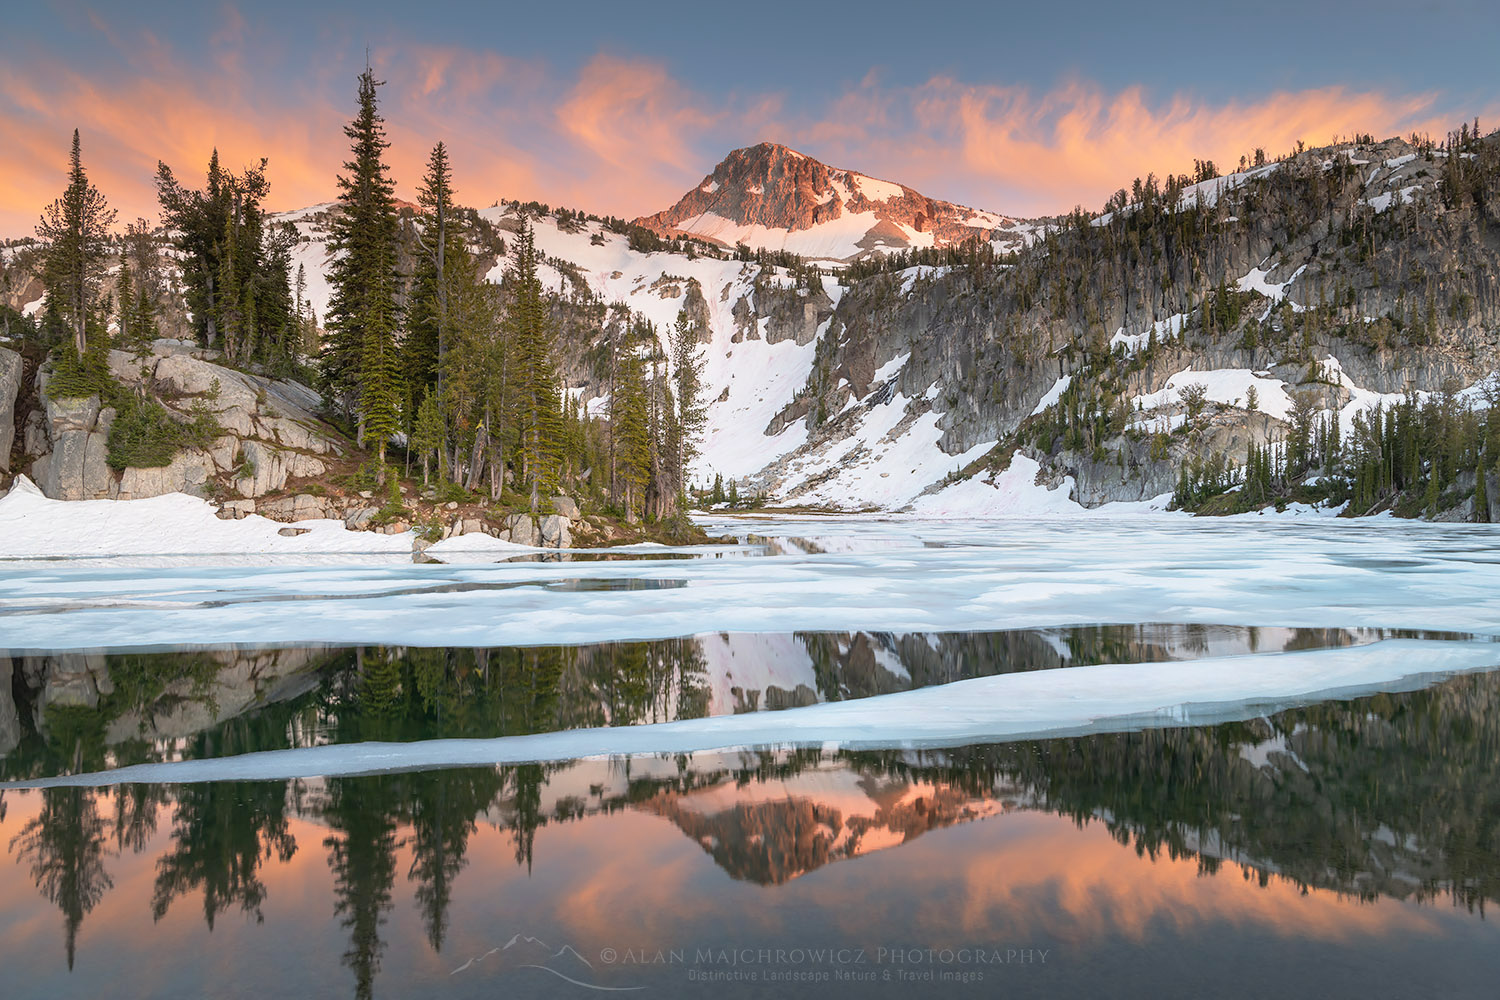 Alpenglow over Eagle Cap reflected in Mirror Lake, Eagle Cap Wilderness, Wallowa Mountains, Oregon #68793